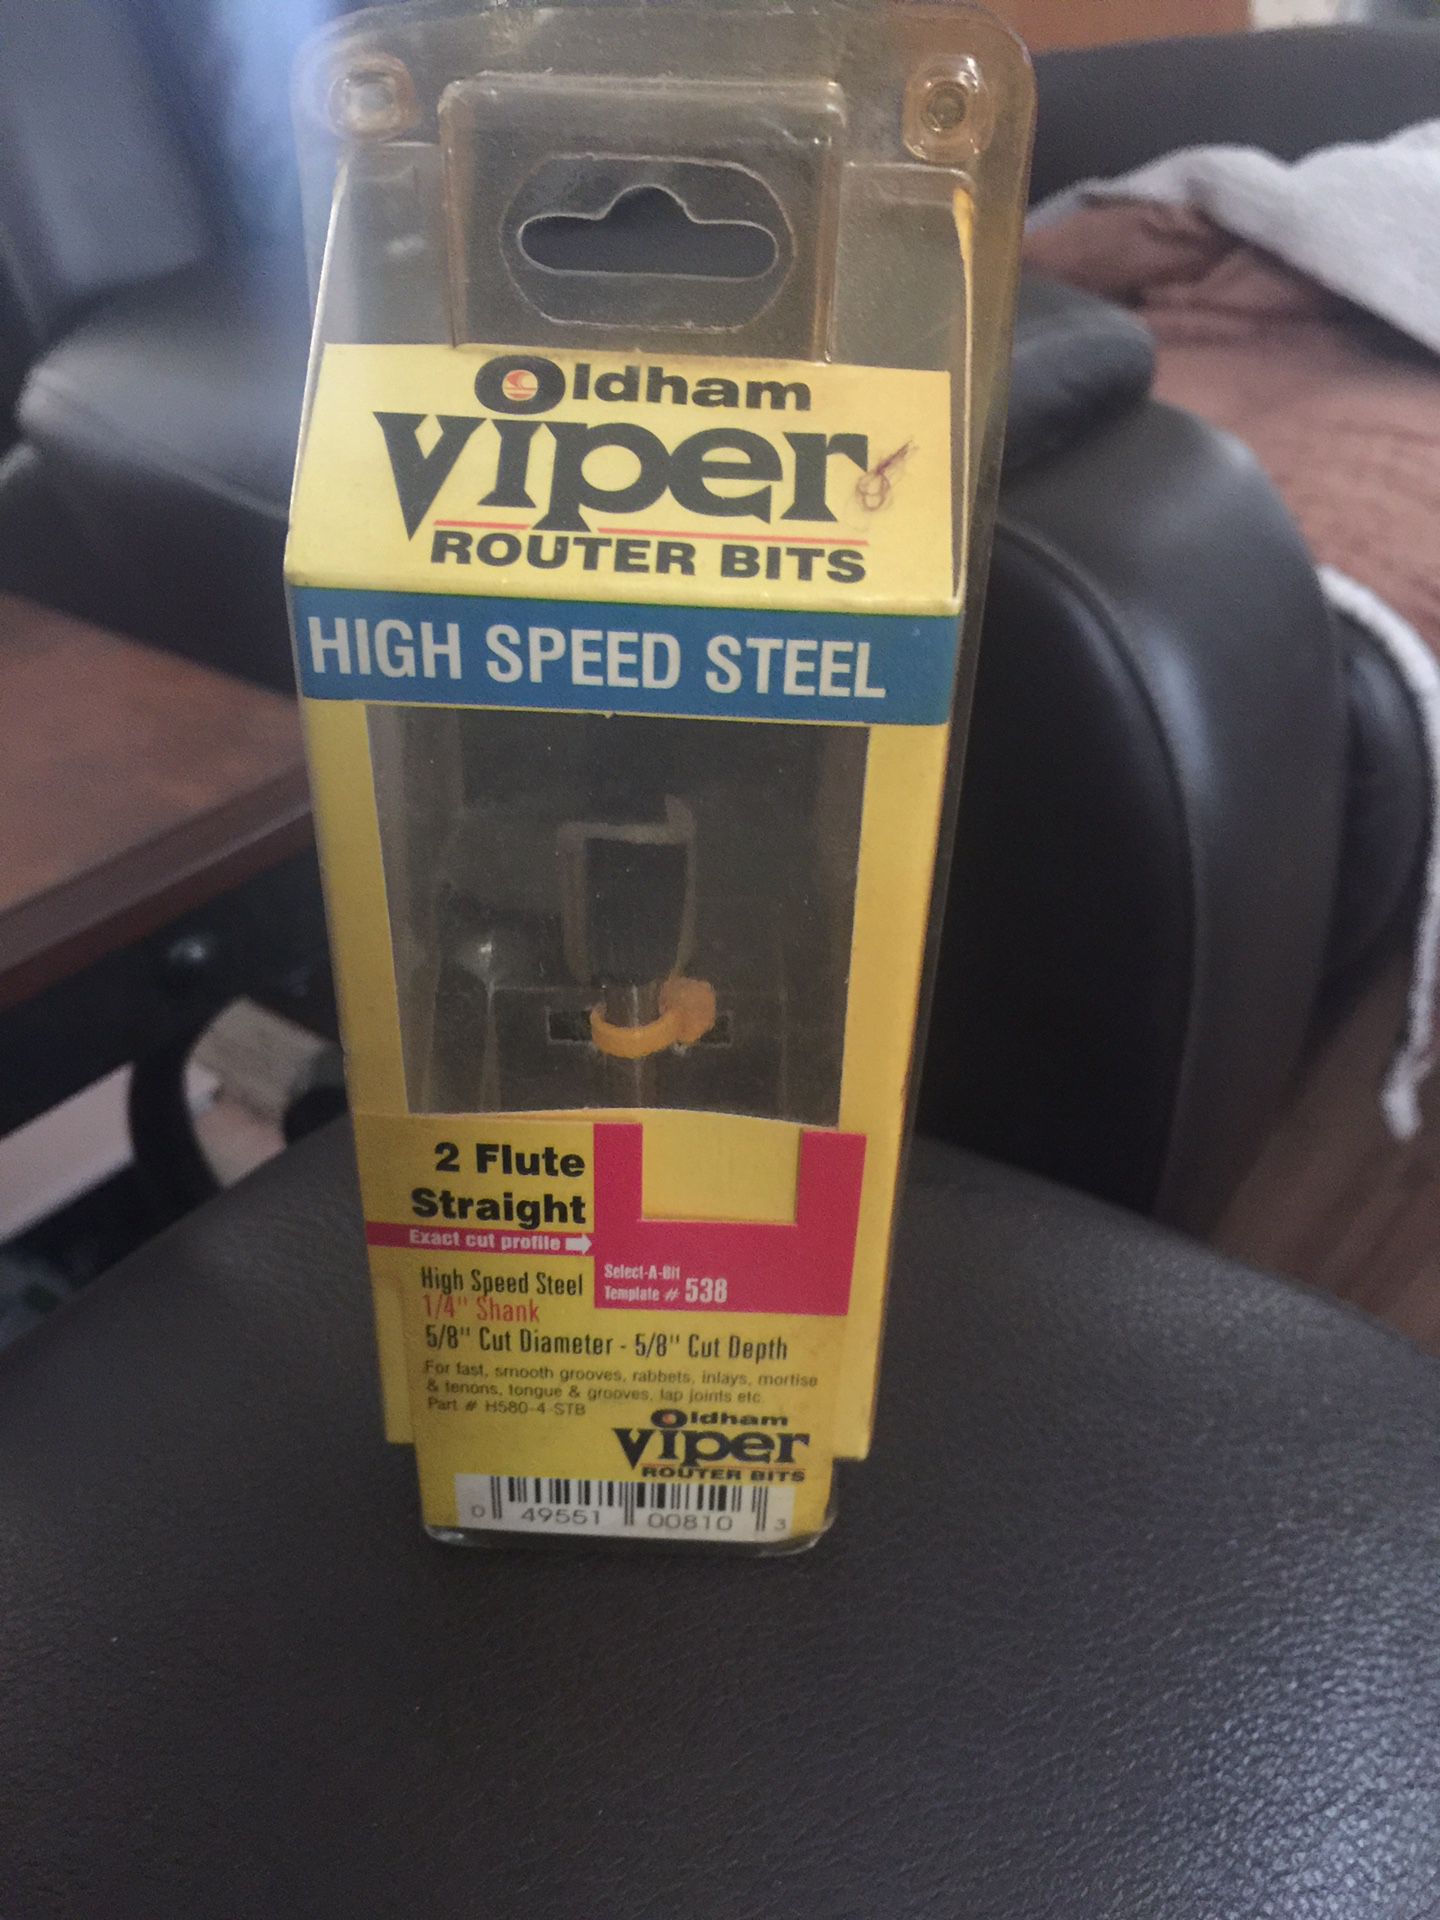 Viper high speed steel router bits all for 50 dollars